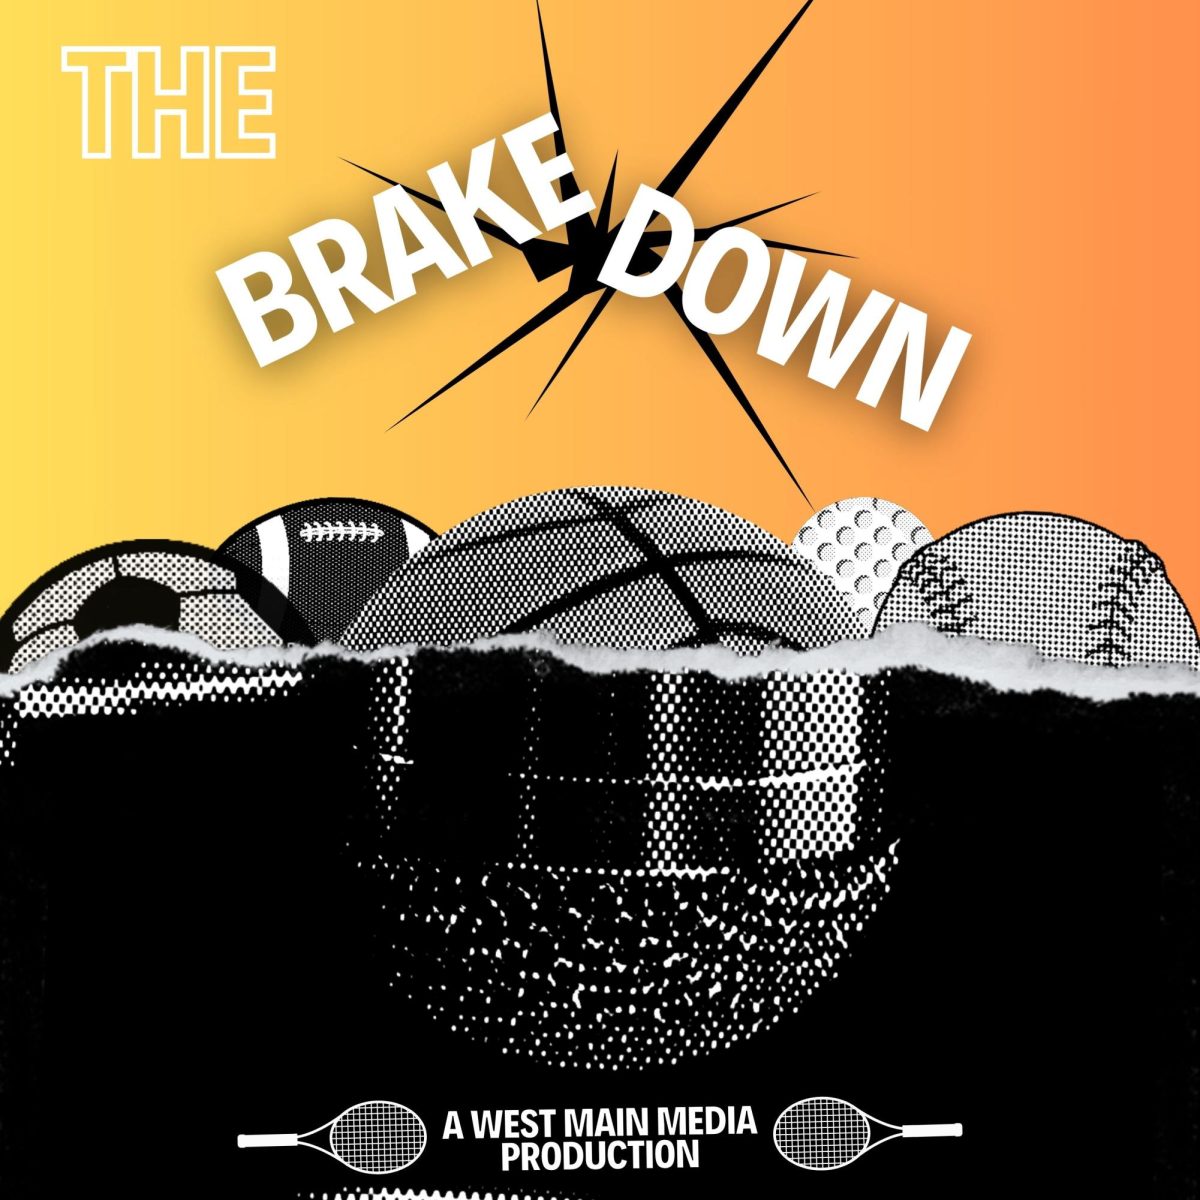 On+each+episode+of+The+Brakedown%2C+an+interview+explores+the+impact+sports+has+on+every+aspect+of+a+persons+life.